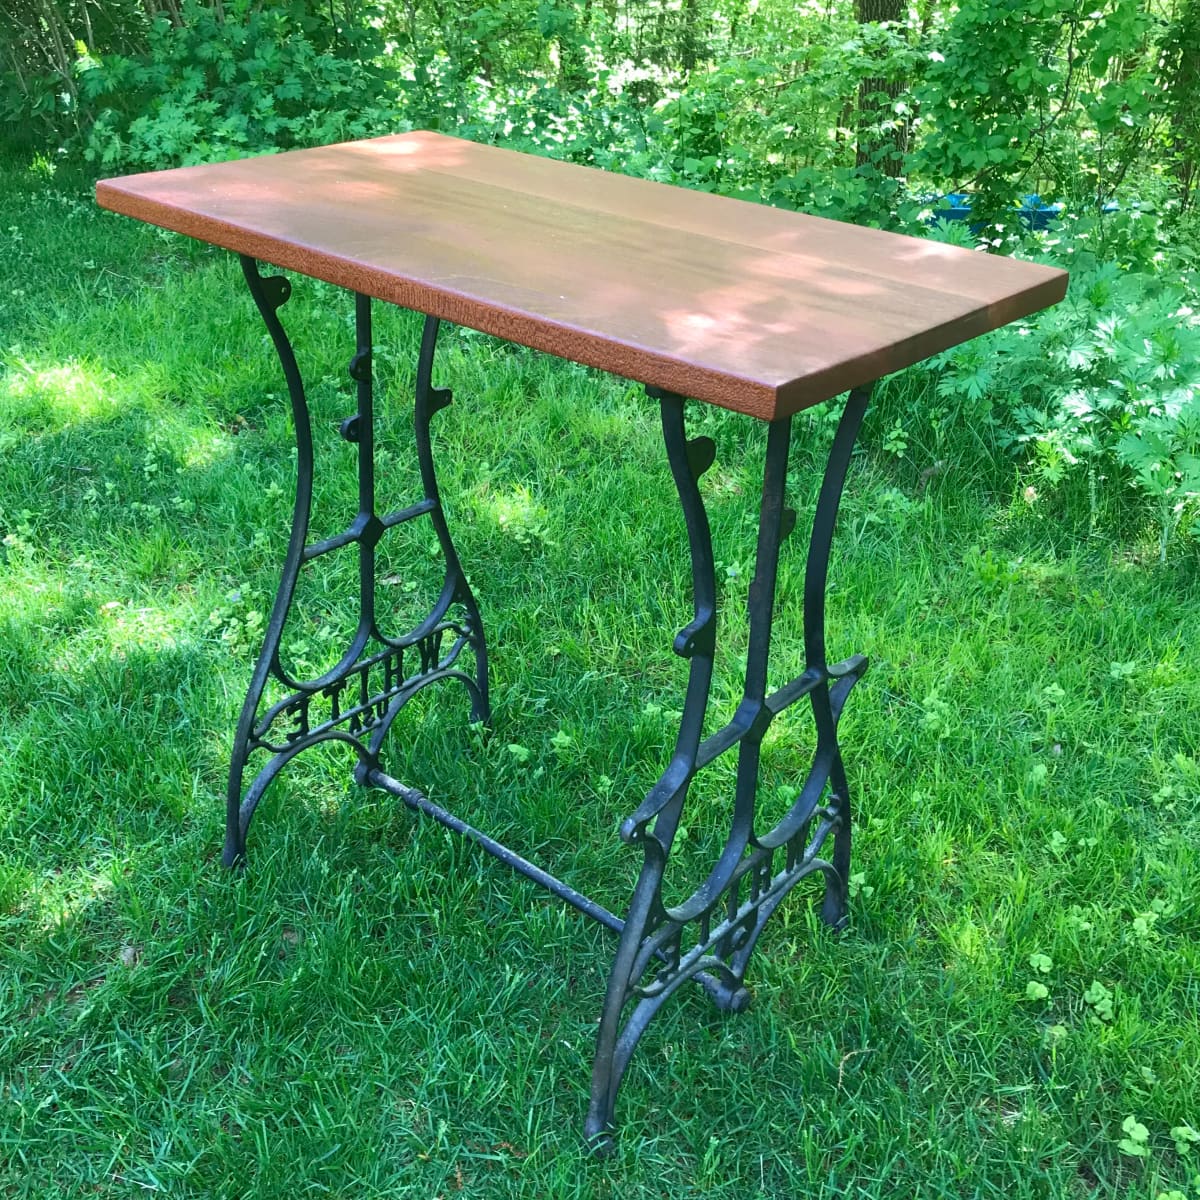 How to Repurpose an Antique Sewing Machine Base Into a Unique Table -  FeltMagnet